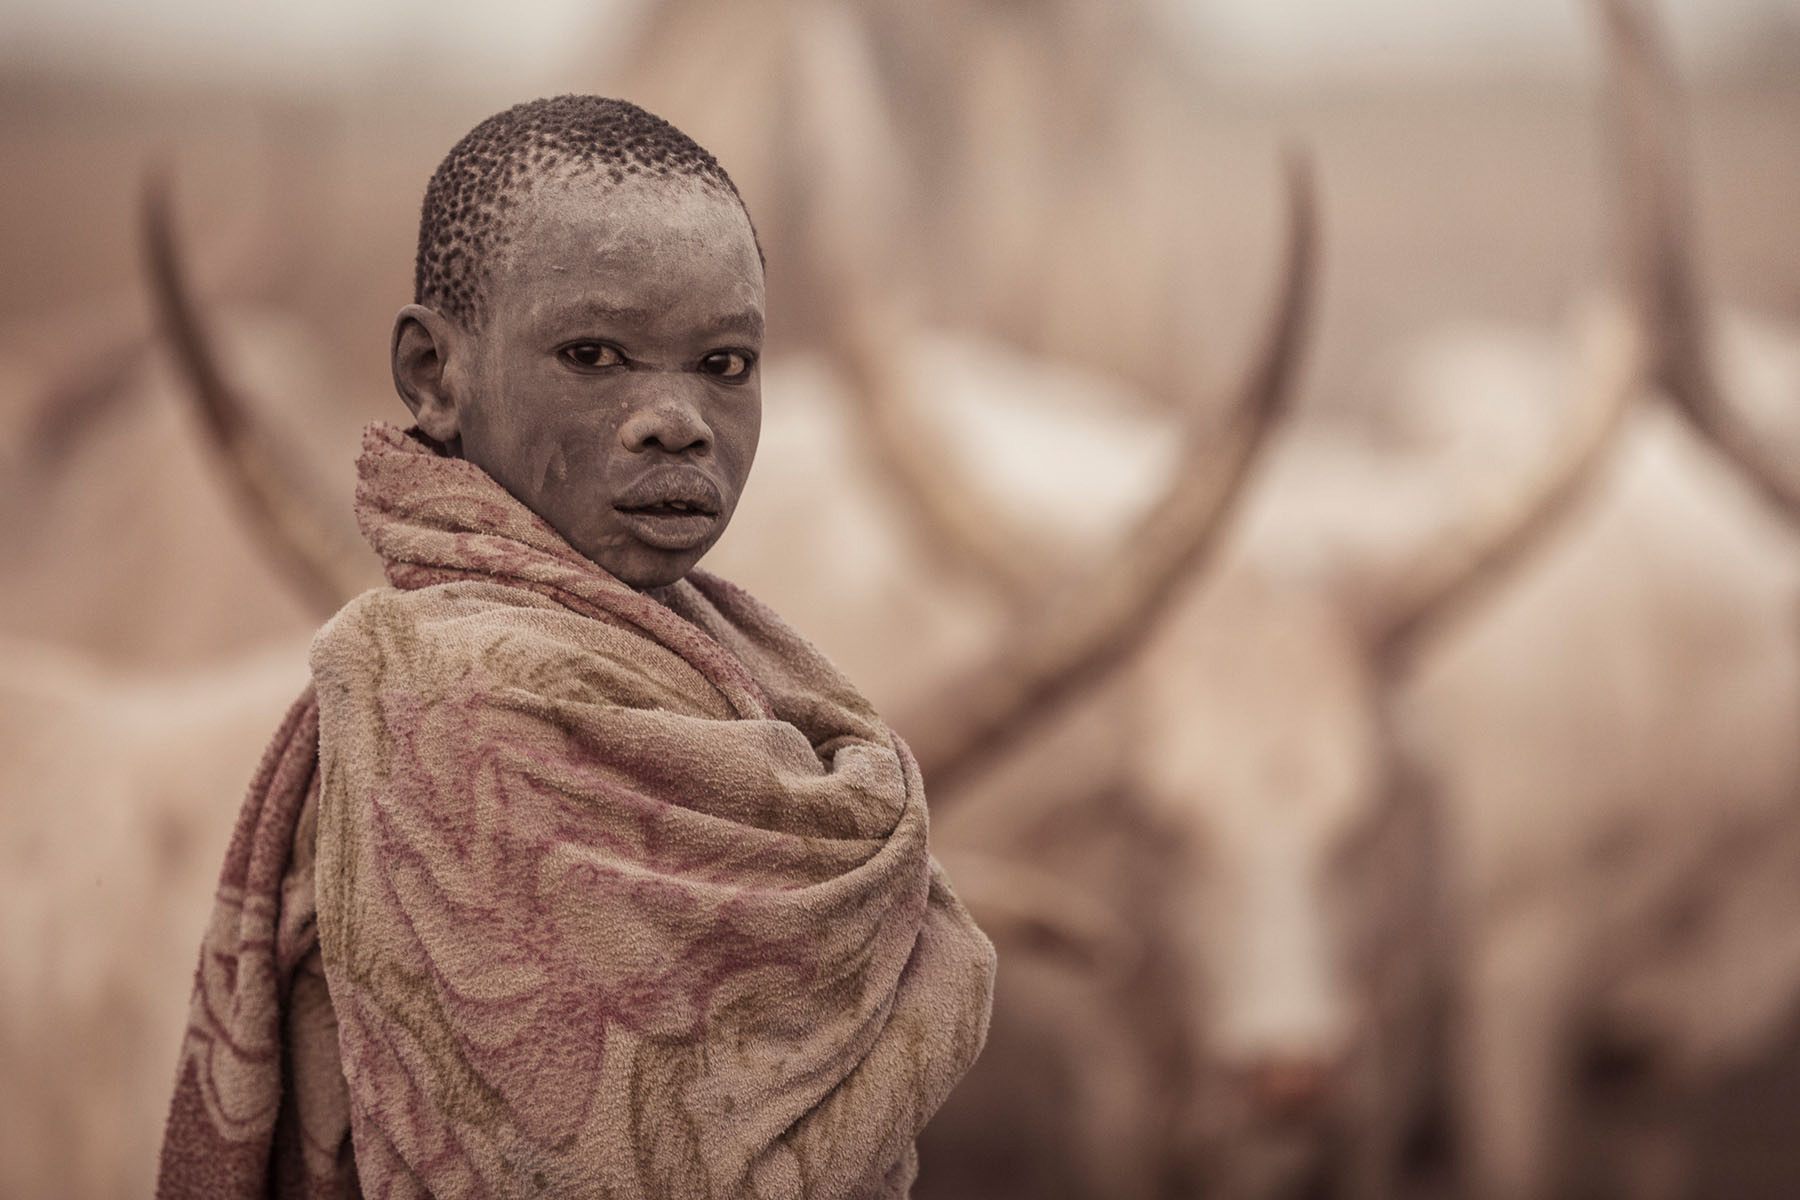 A Mundari boy covers himself with a blanket in the early morning while keeping watch over the cattle © Joe Buergi